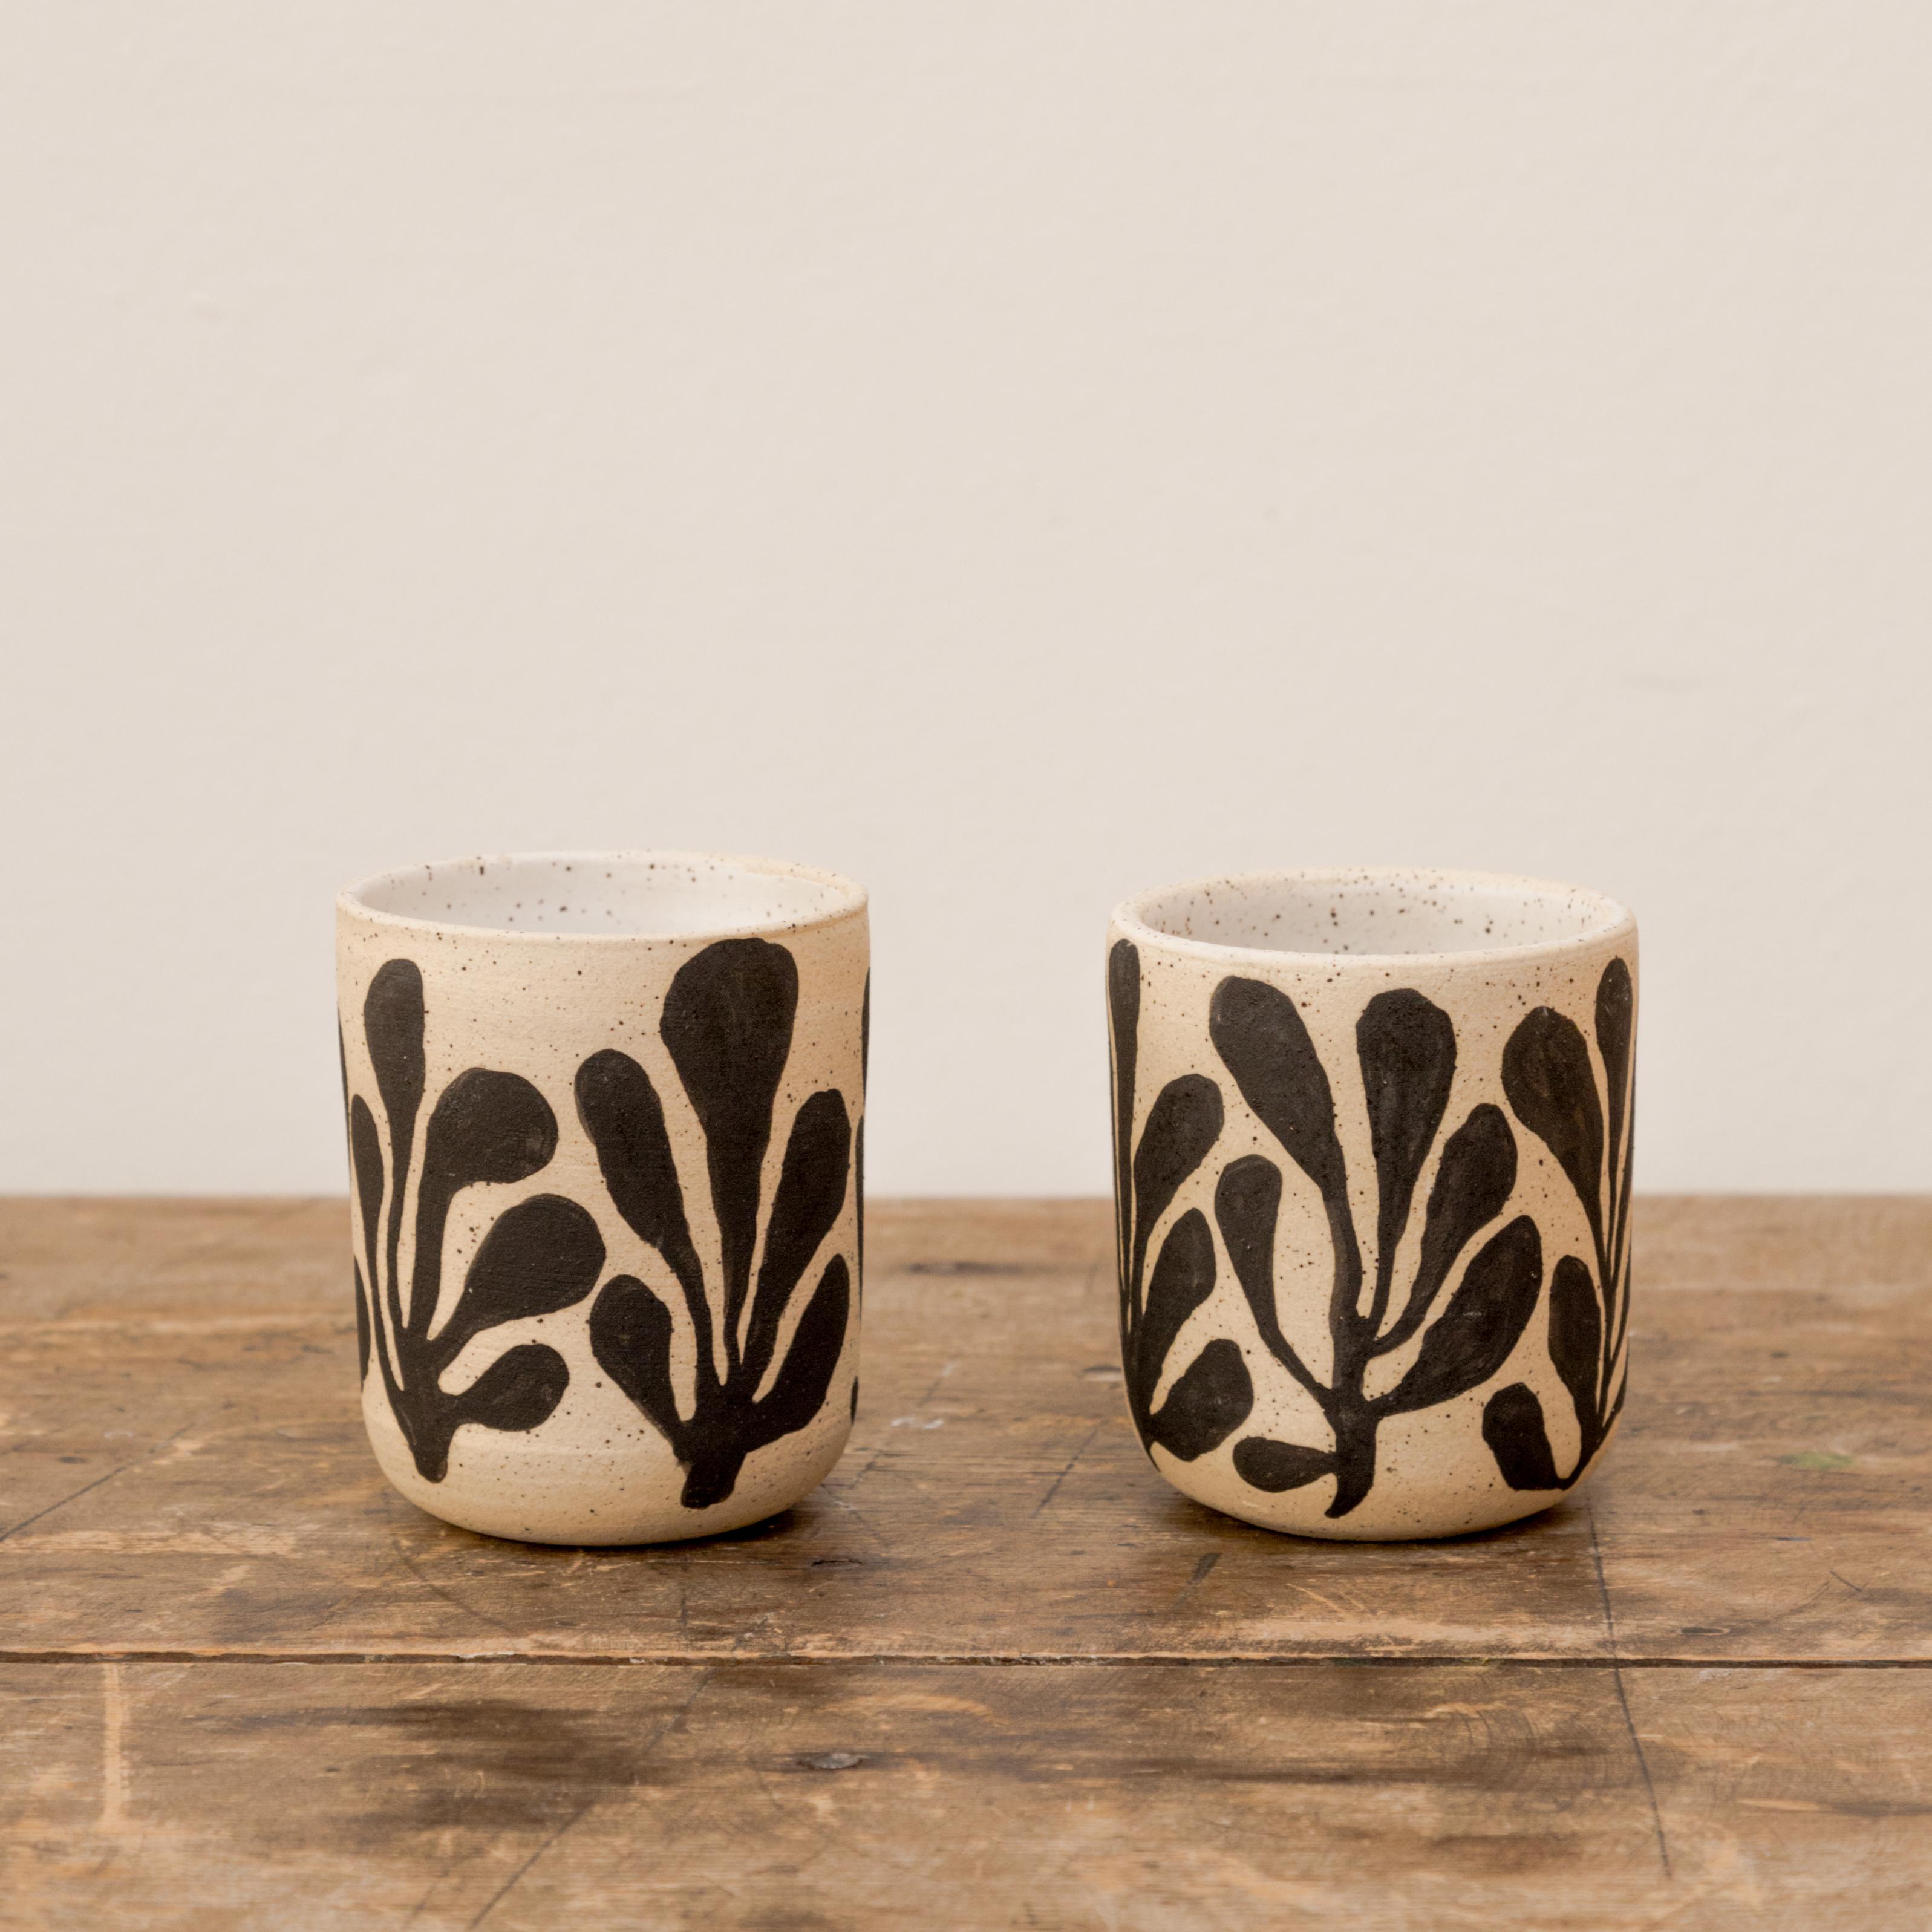 Pair of small ceramic vessels with botanical graphic by Kaila Medina (Sold individually).